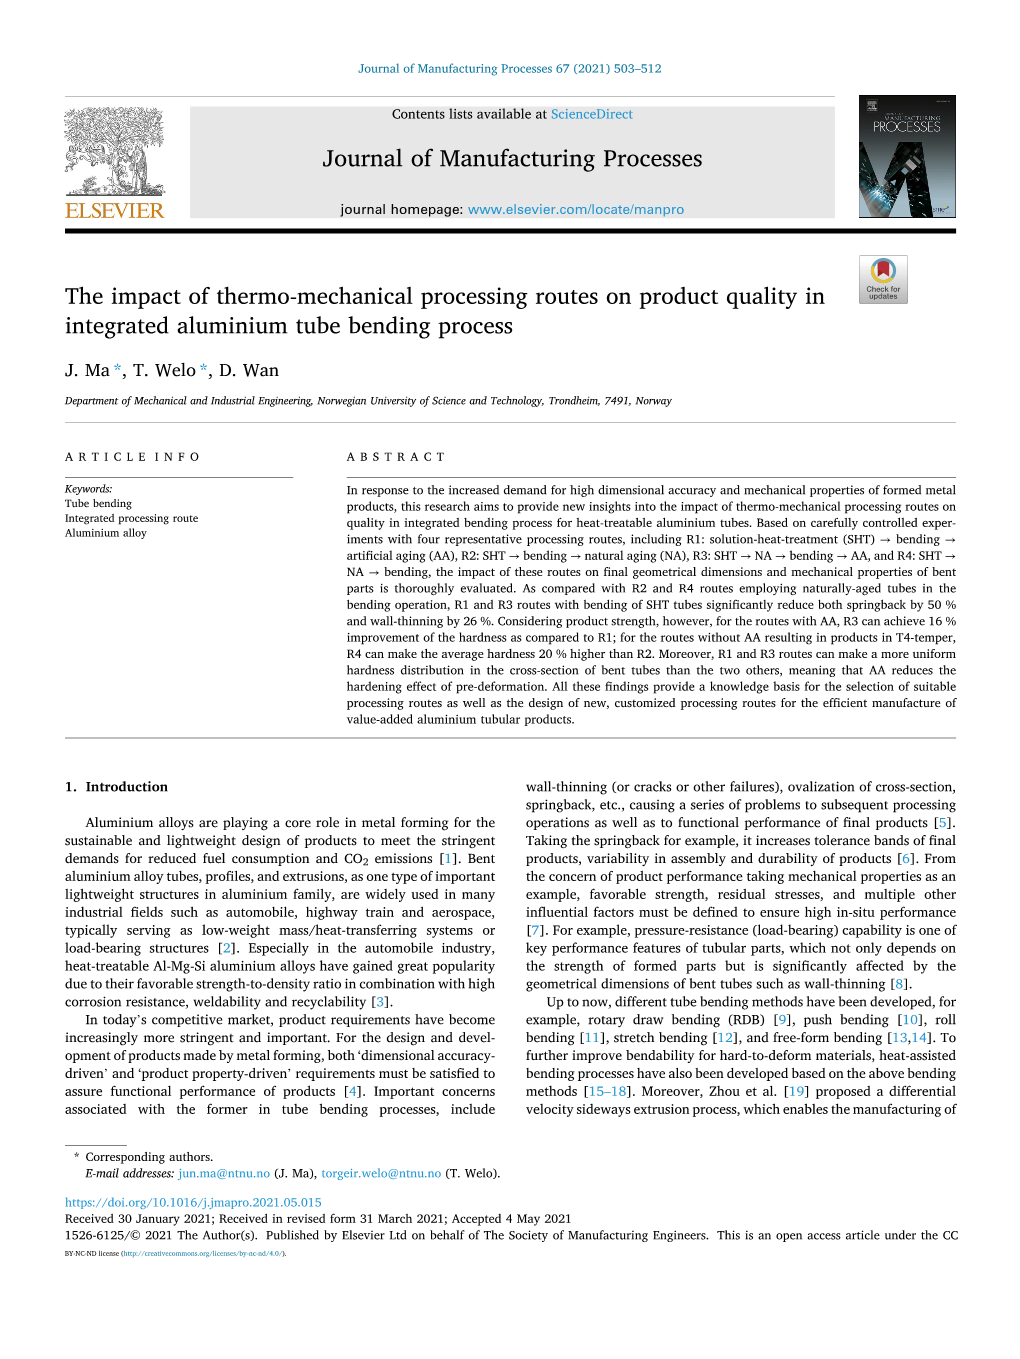 The Impact of Thermo-Mechanical Processing Routes on Product Quality in Integrated Aluminium Tube Bending Process